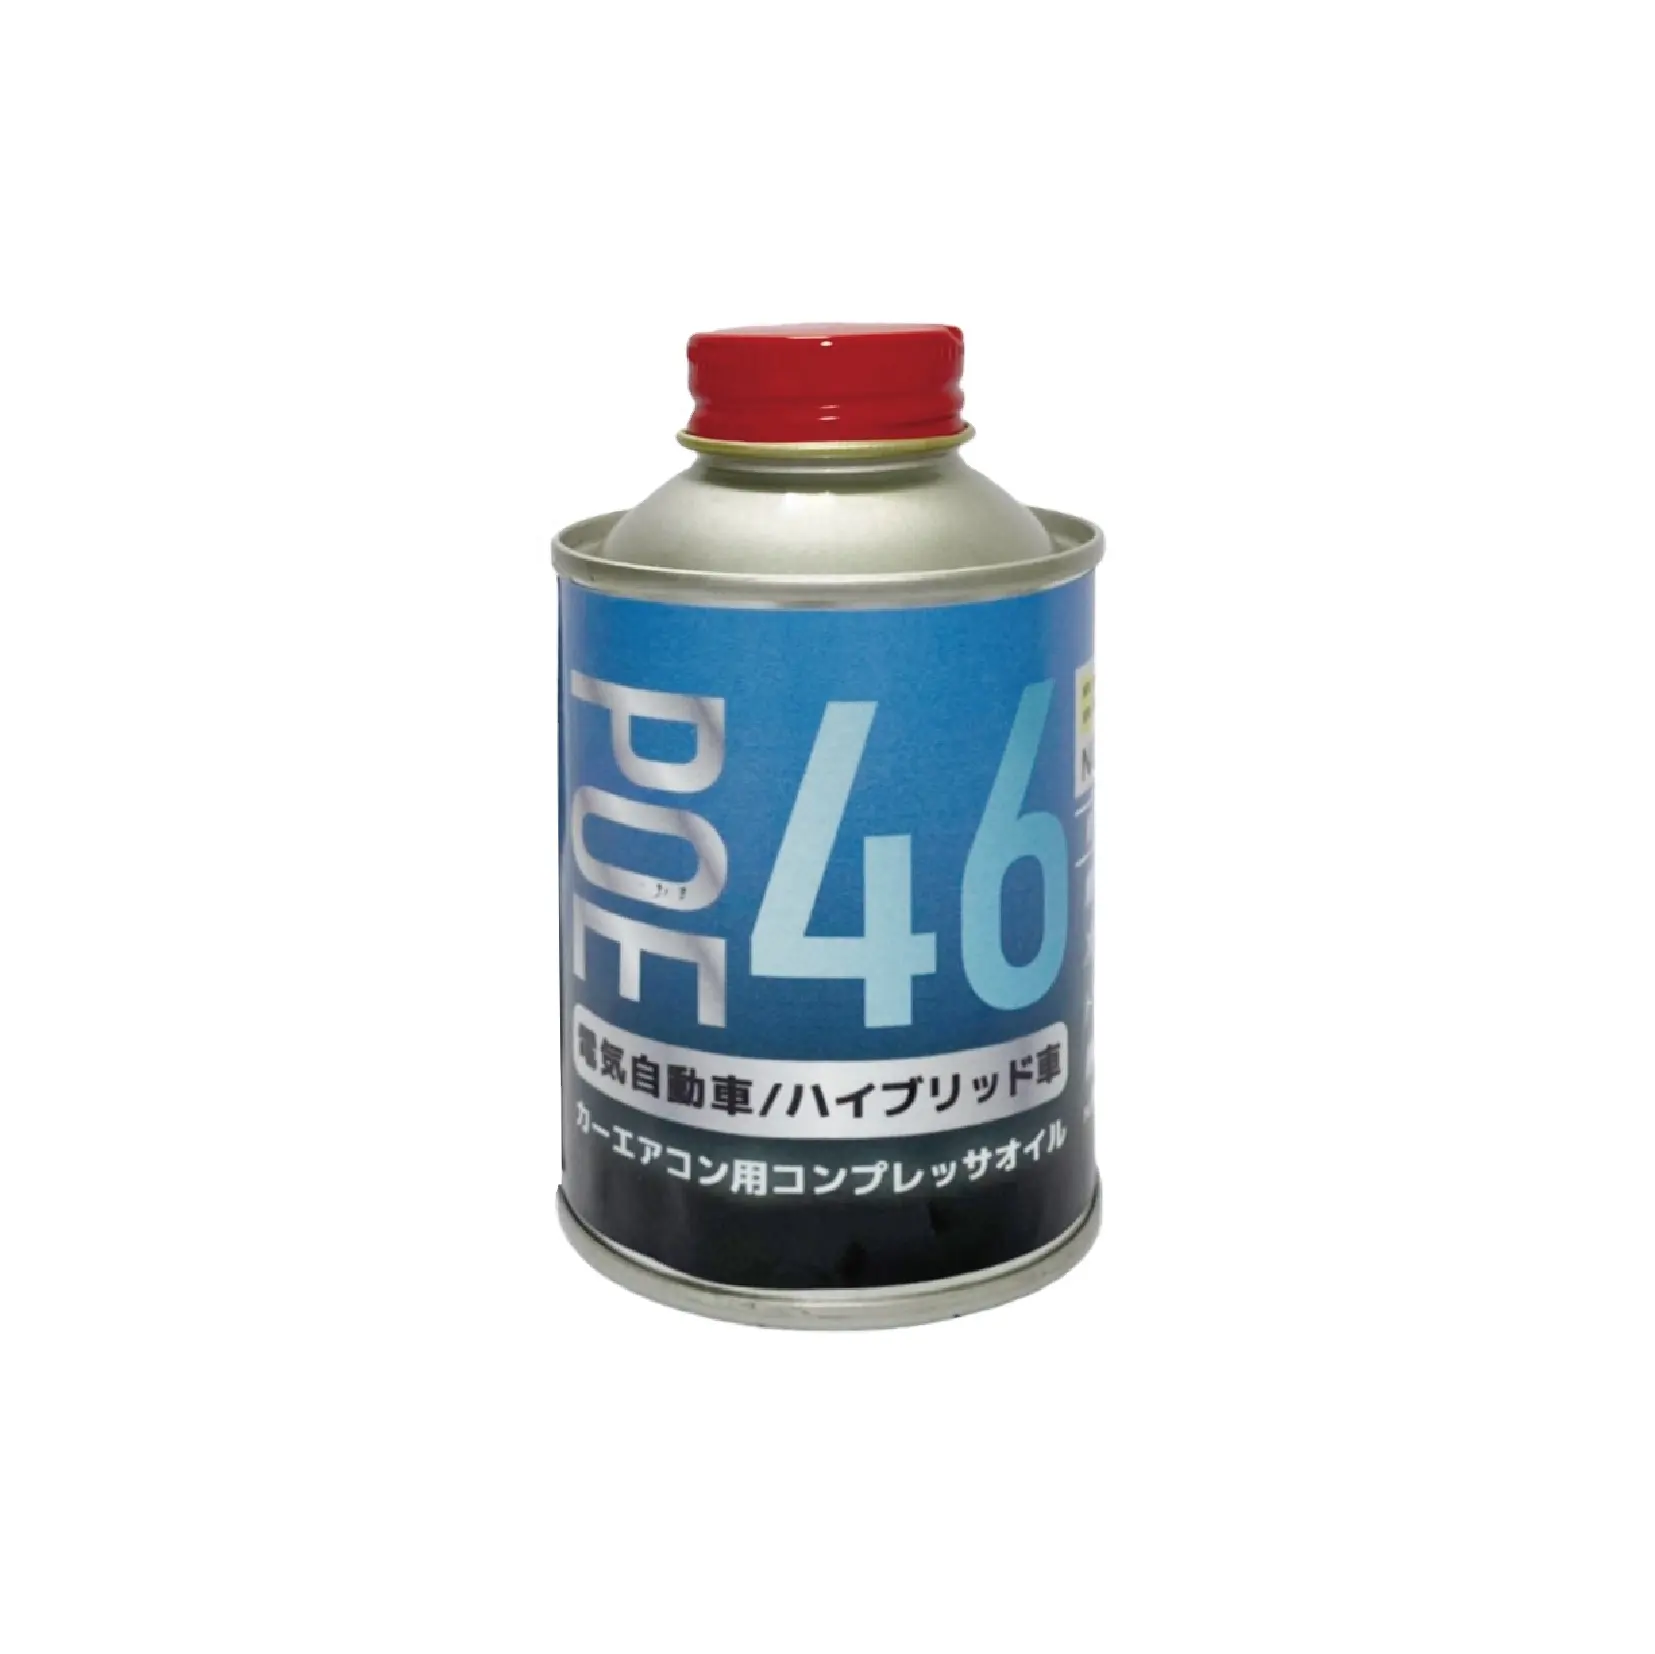 Good quality Auto Lubricant HFC-134a HFO-1234yf POE 46 as Denso ND-OIL 11 Insulation Hybrid vehicle compressor Refrigeration oil